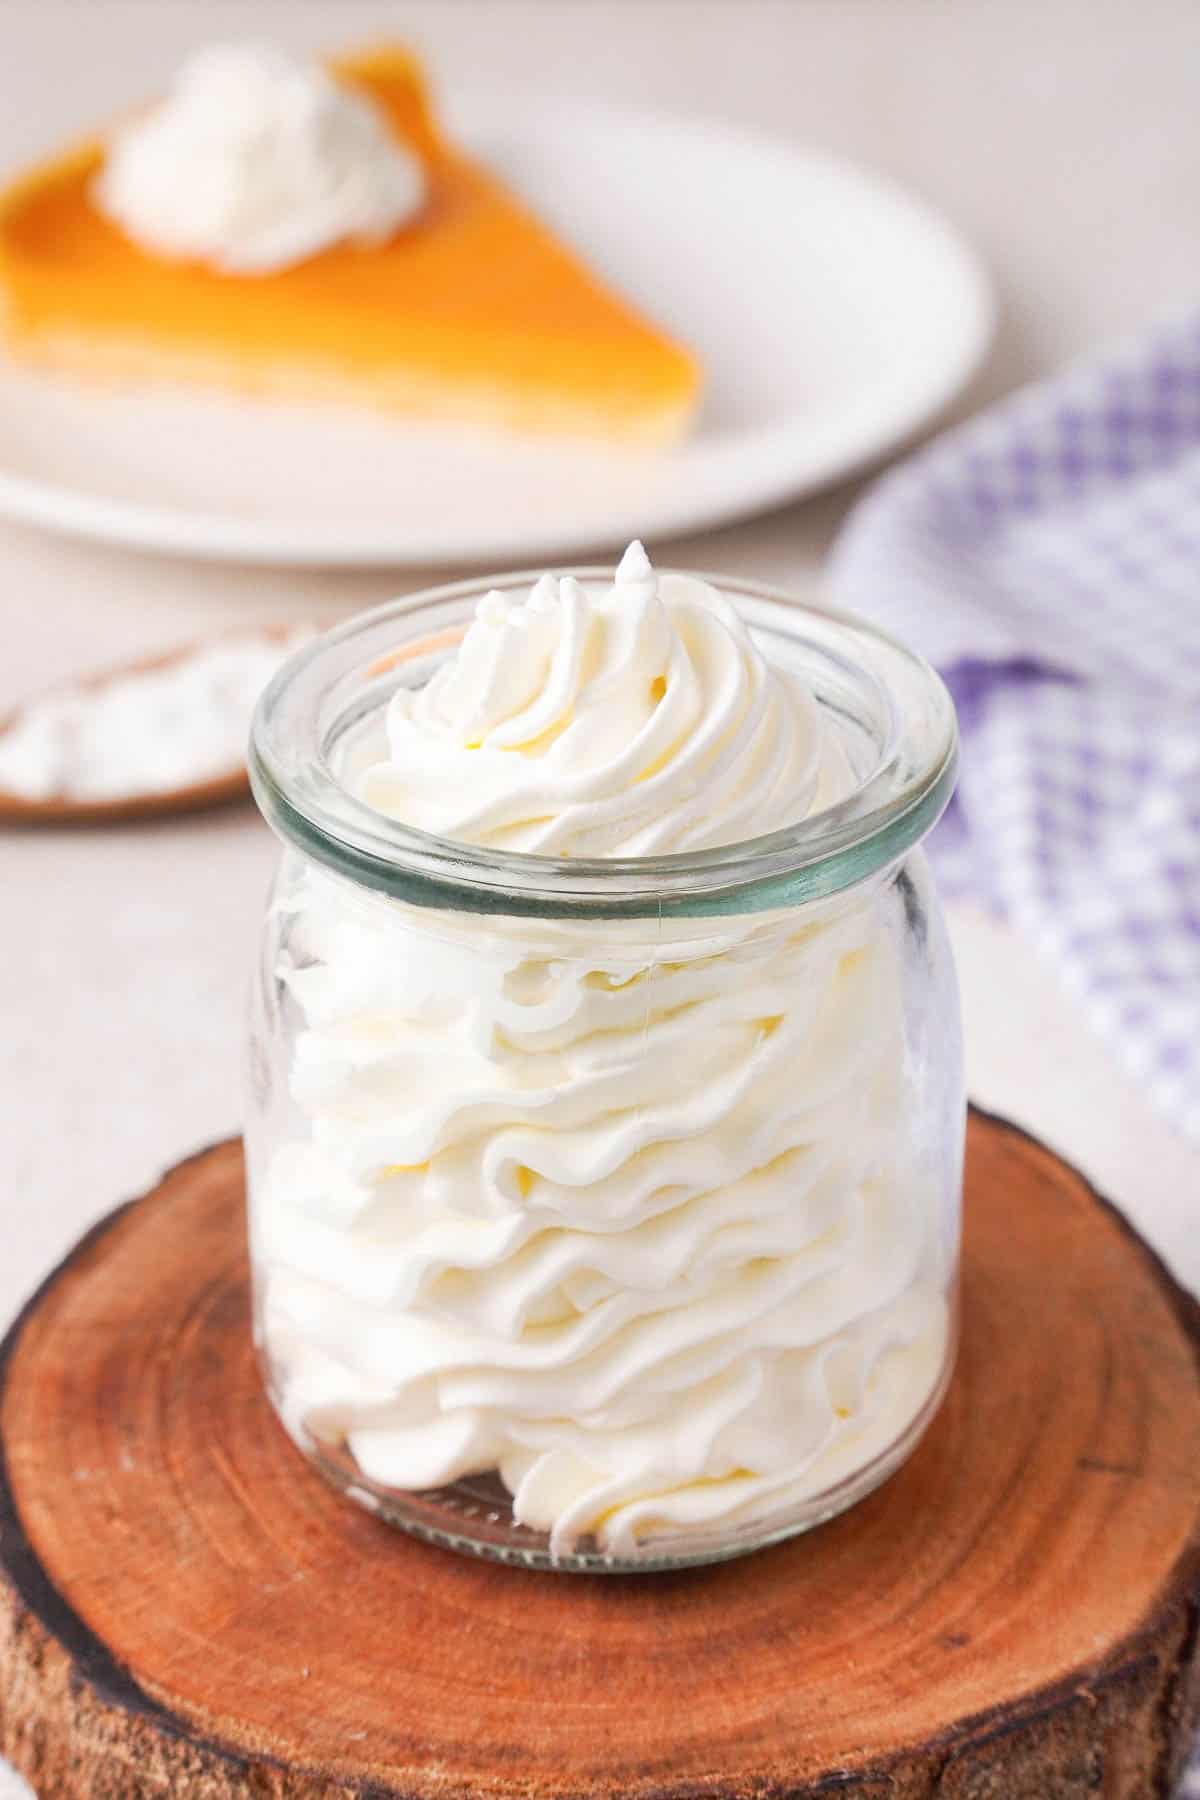 Bourbon whipped cream piped in a glass.